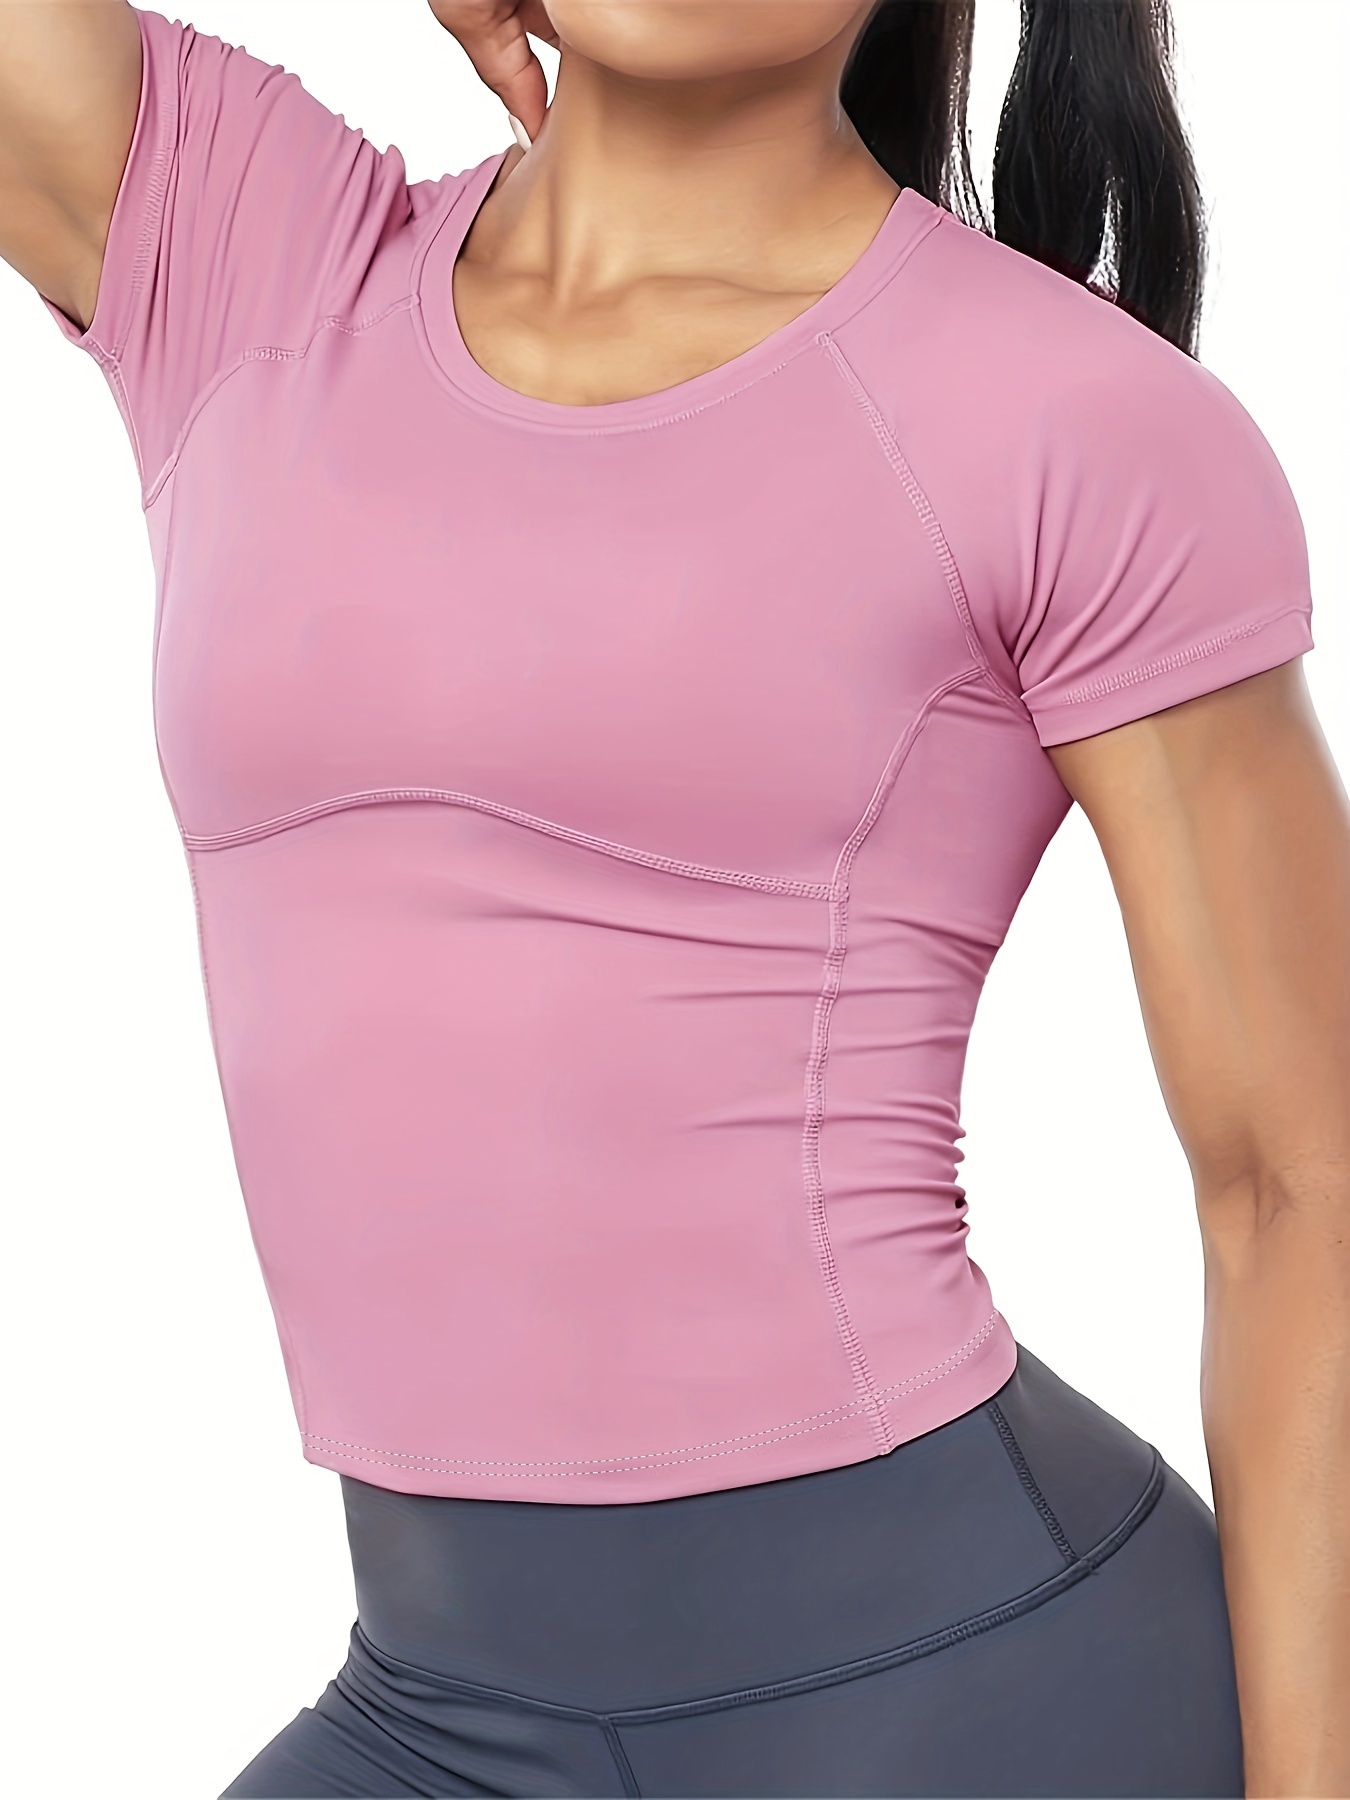 WOMENGAGA Pink Sports Top For Women Fast Dry, Short And Long Sleeve Fitness  Gym Shirts Women With Korean Style Sexy And Stylish R8VJ 210603 From Bai02,  $18.33